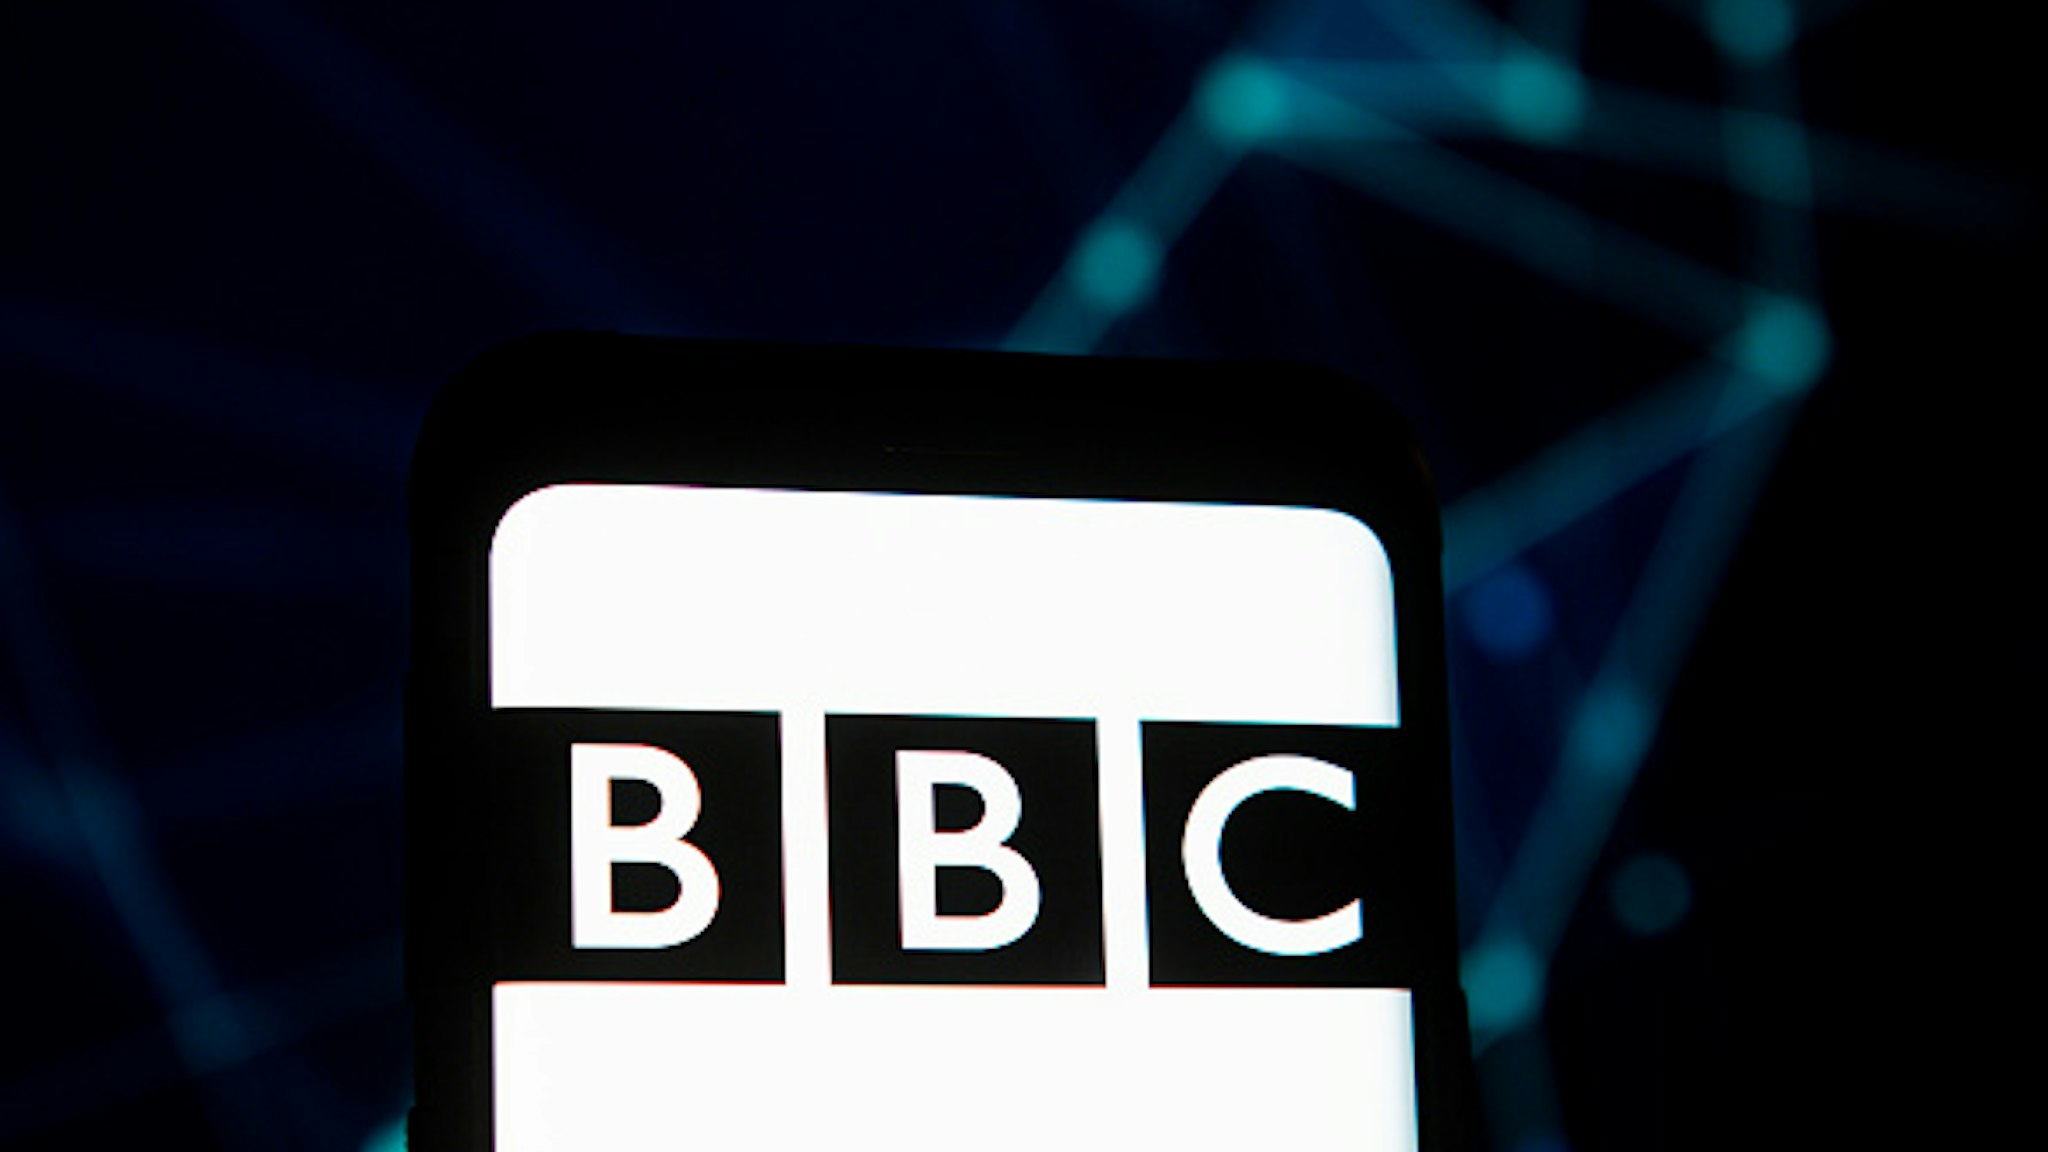 POLAND - 2020/03/23: In this photo illustration a BBC logo seen displayed on a smartphone.